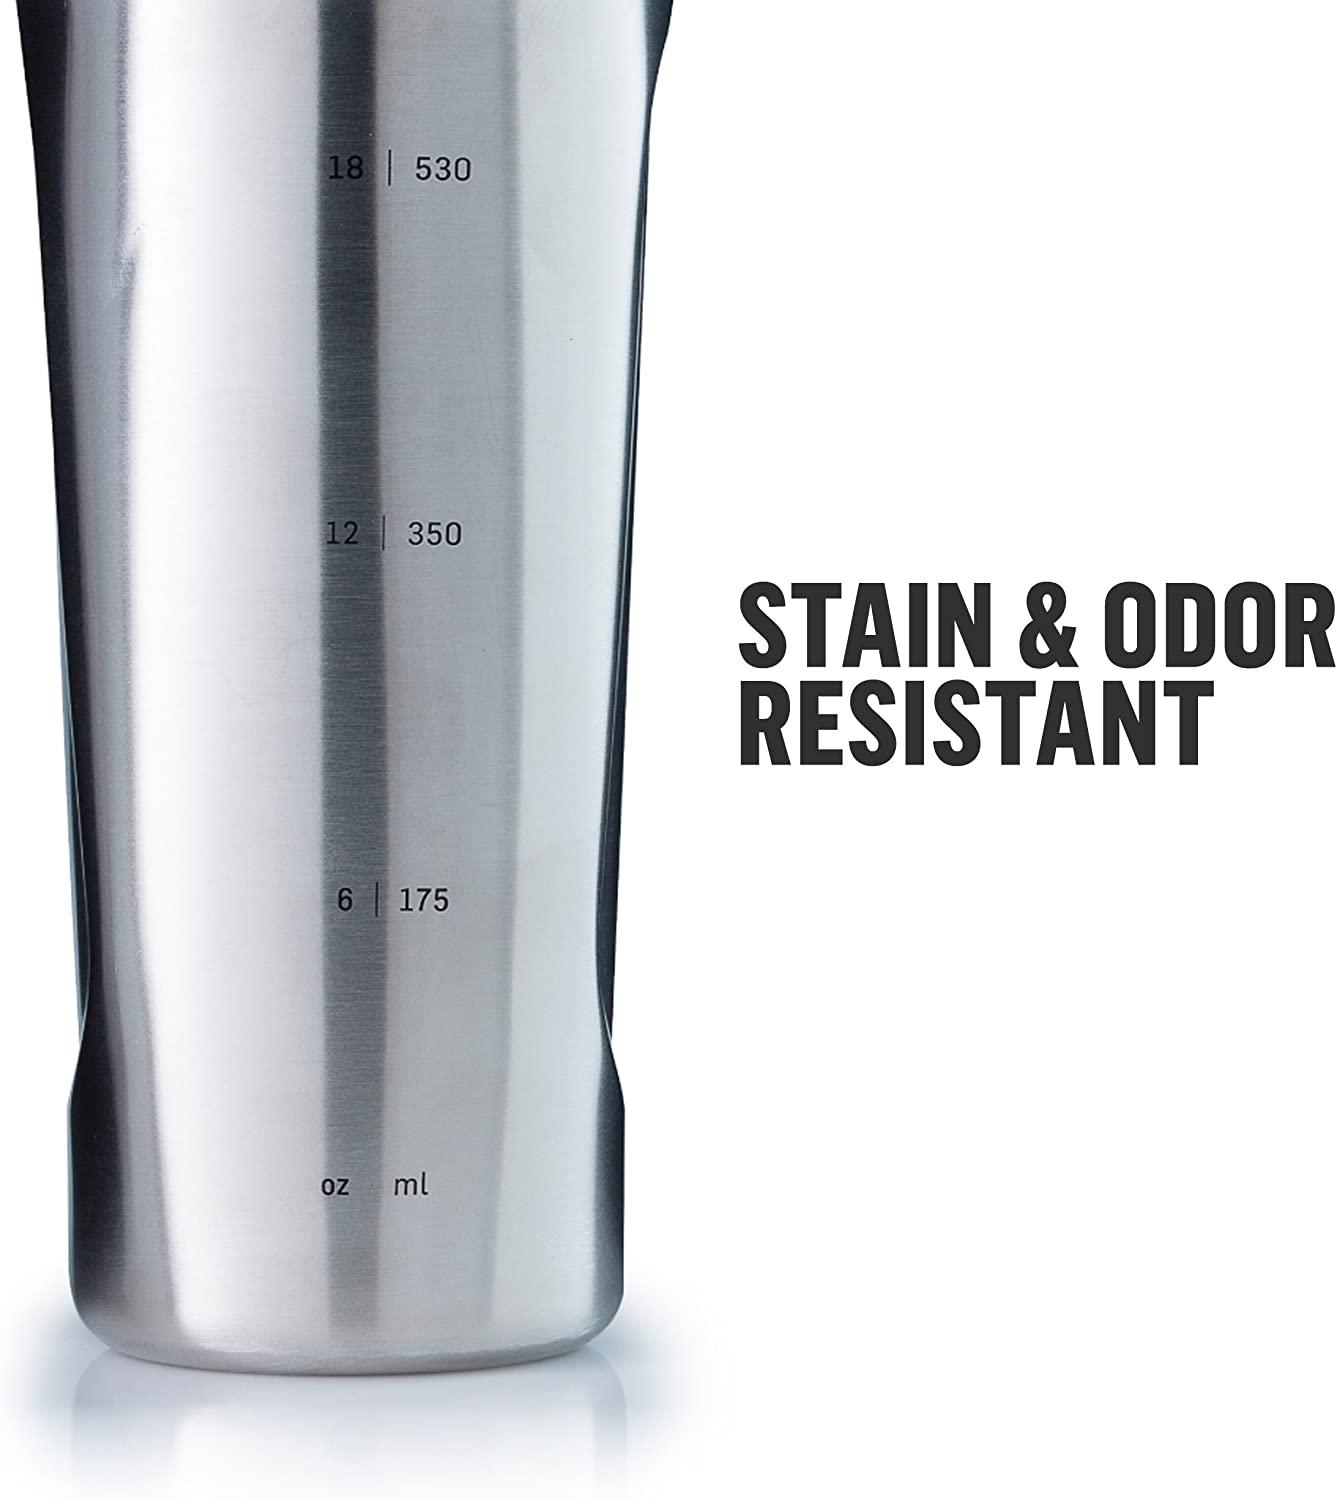 Radian, Insulated Stainless Steel, Matte Black, 26 oz